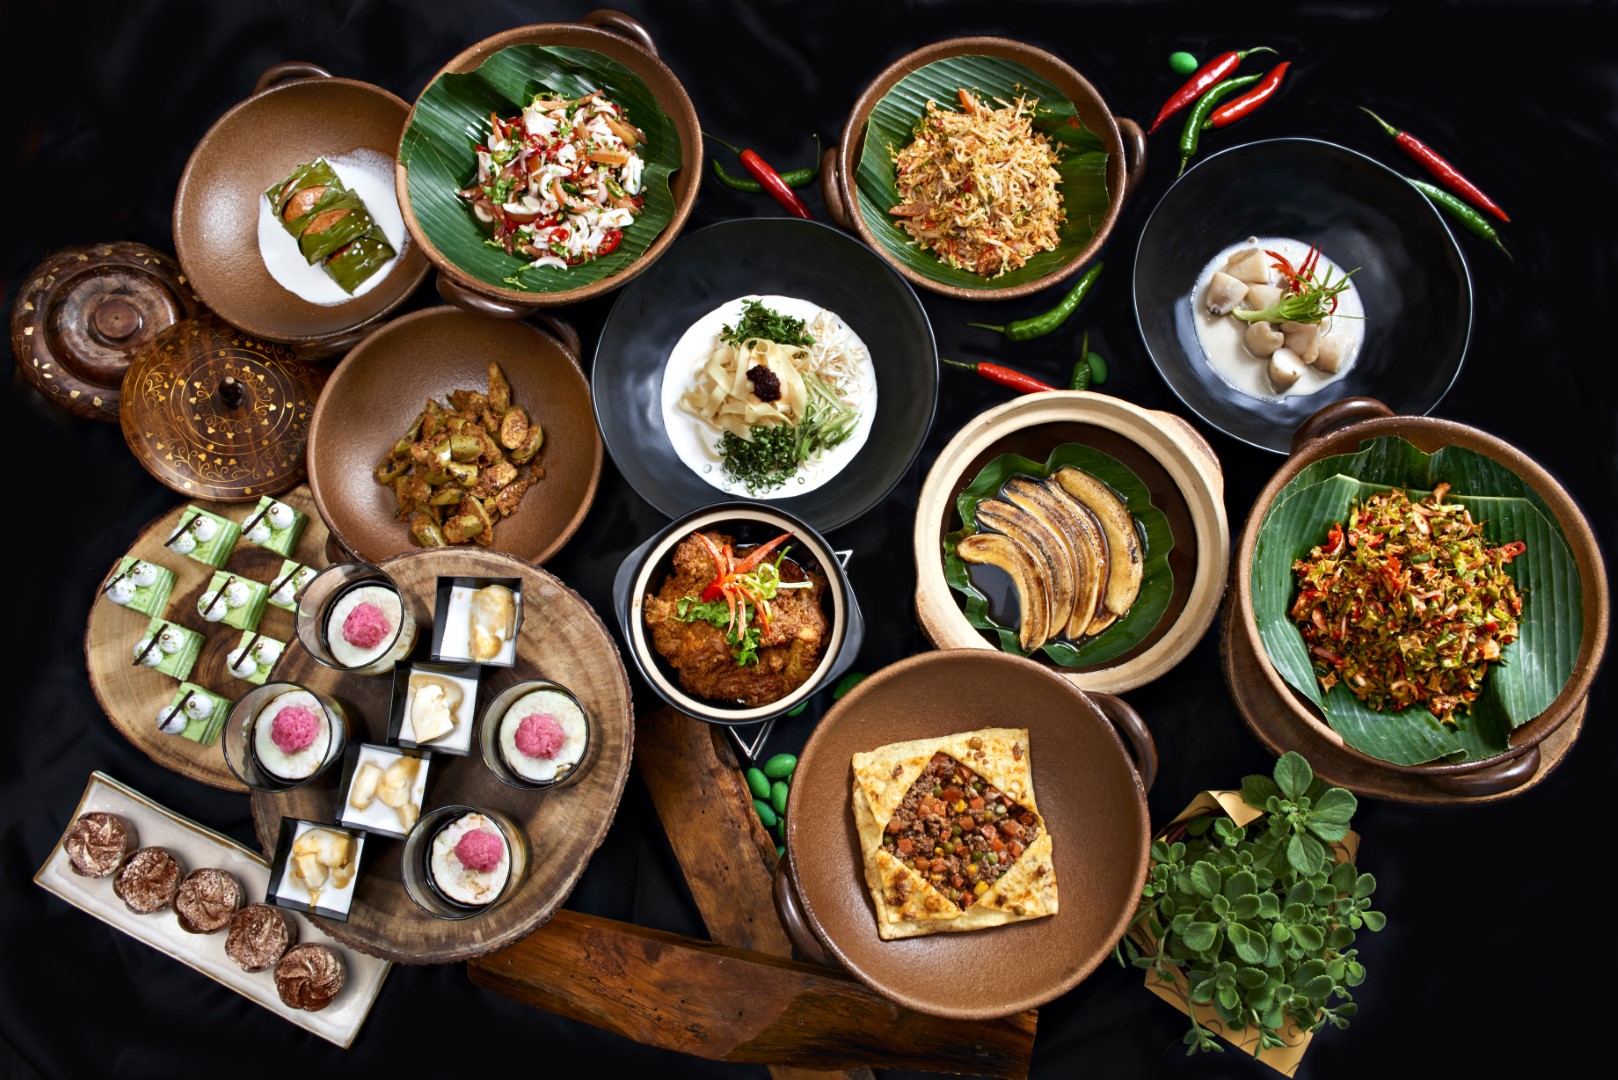 Bringing Premium Dining Home: Marriott International Hotels in Malaysia Partner with Grab Food